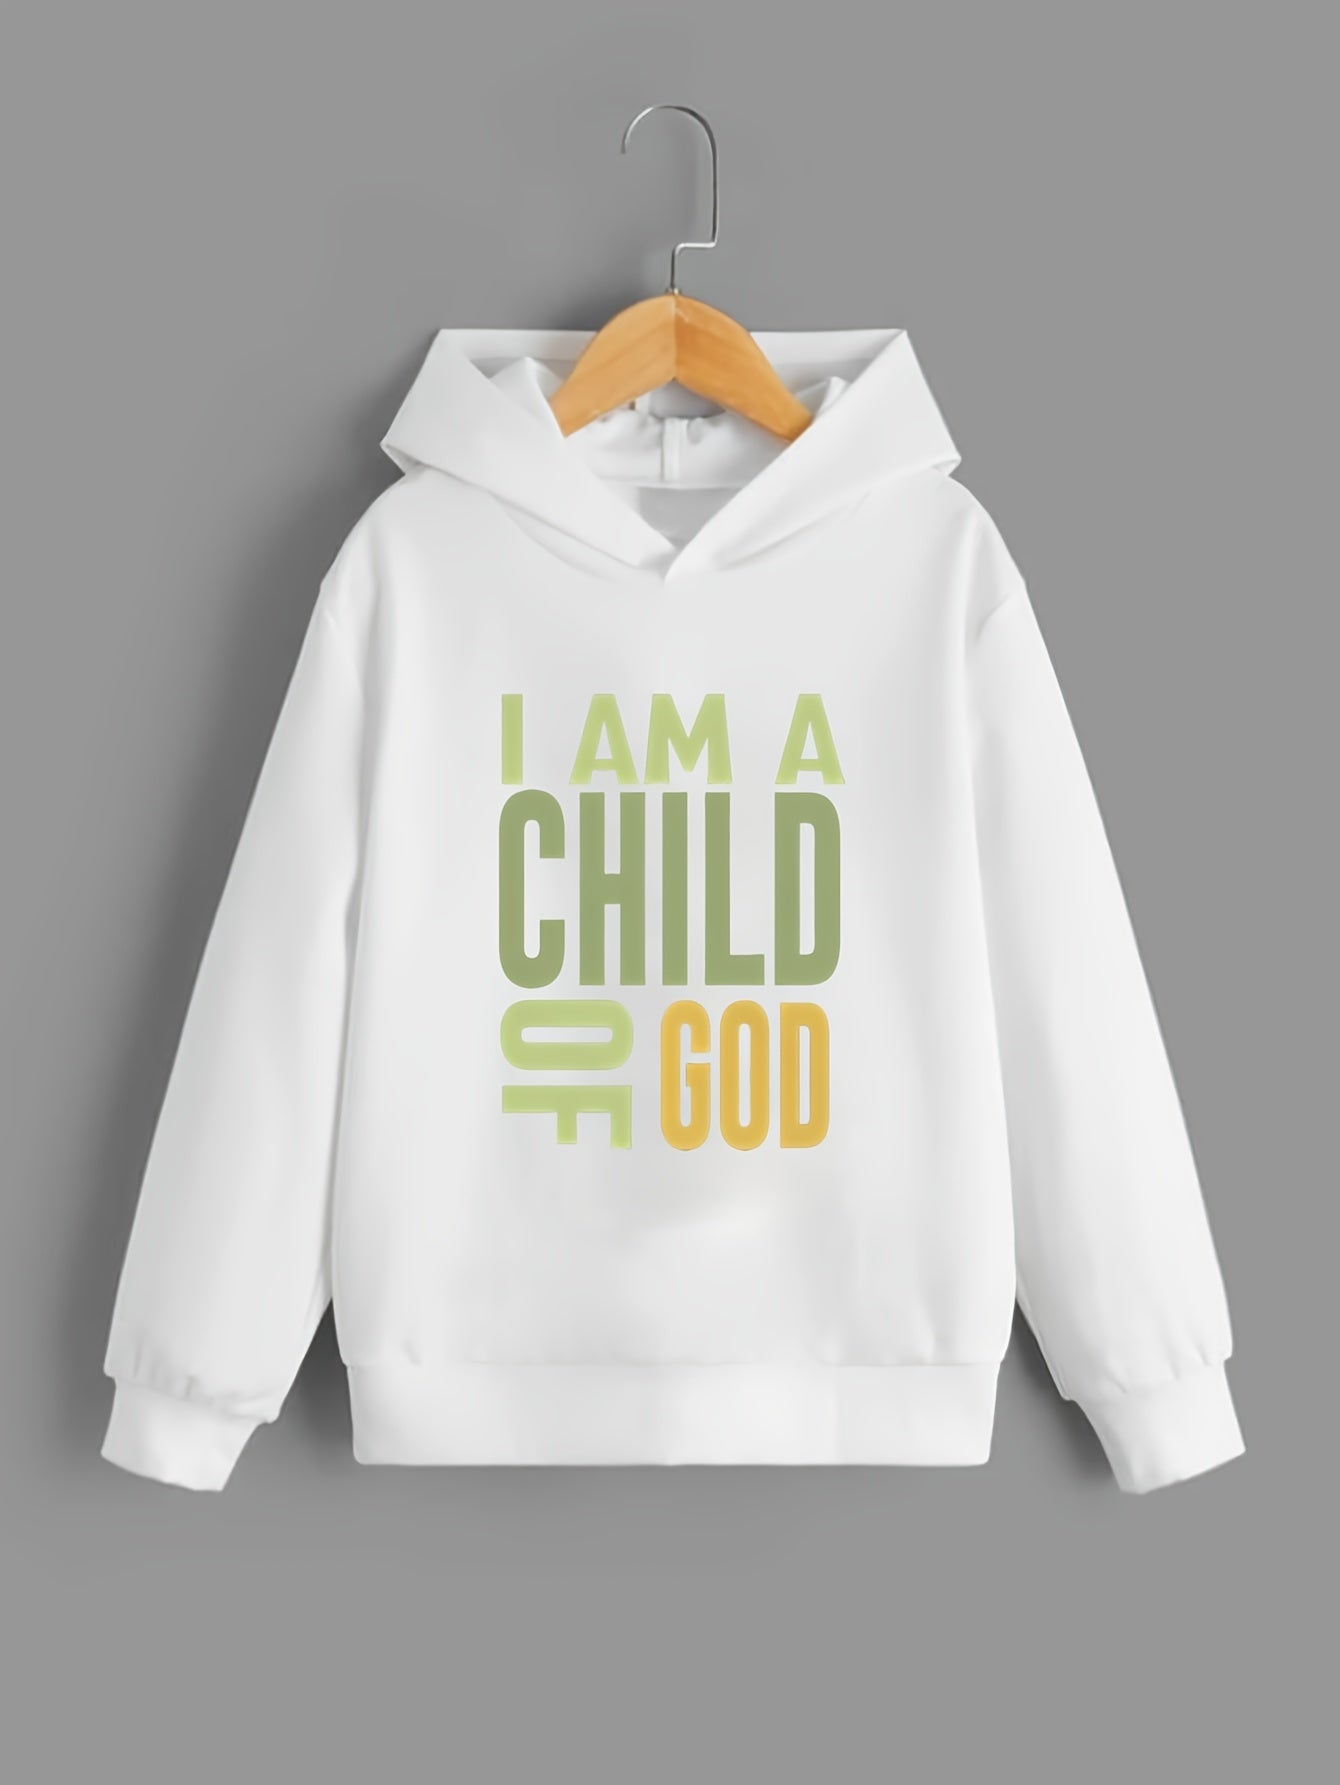 I AM A CHILD OF GOD Youth Christian Pullover Hooded Sweatshirt claimedbygoddesigns